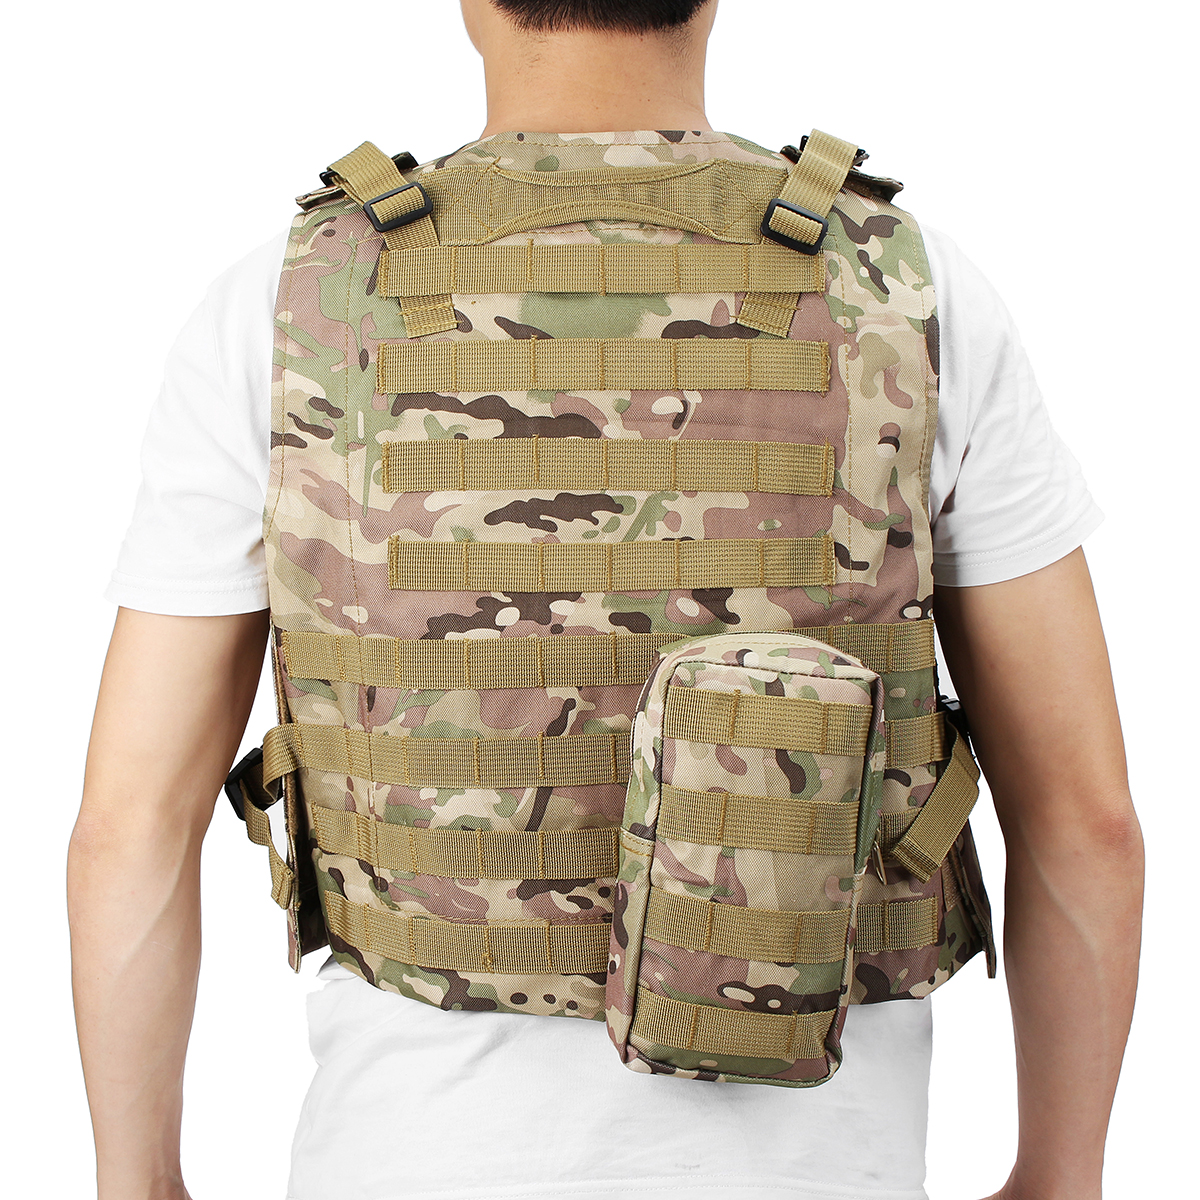 Military-Tactical-Vest-Molle-Combat-Assault-Plate-Carrier-Tactical-Vest-CS-Outdoor-Clothing-Hunting--1817235-7